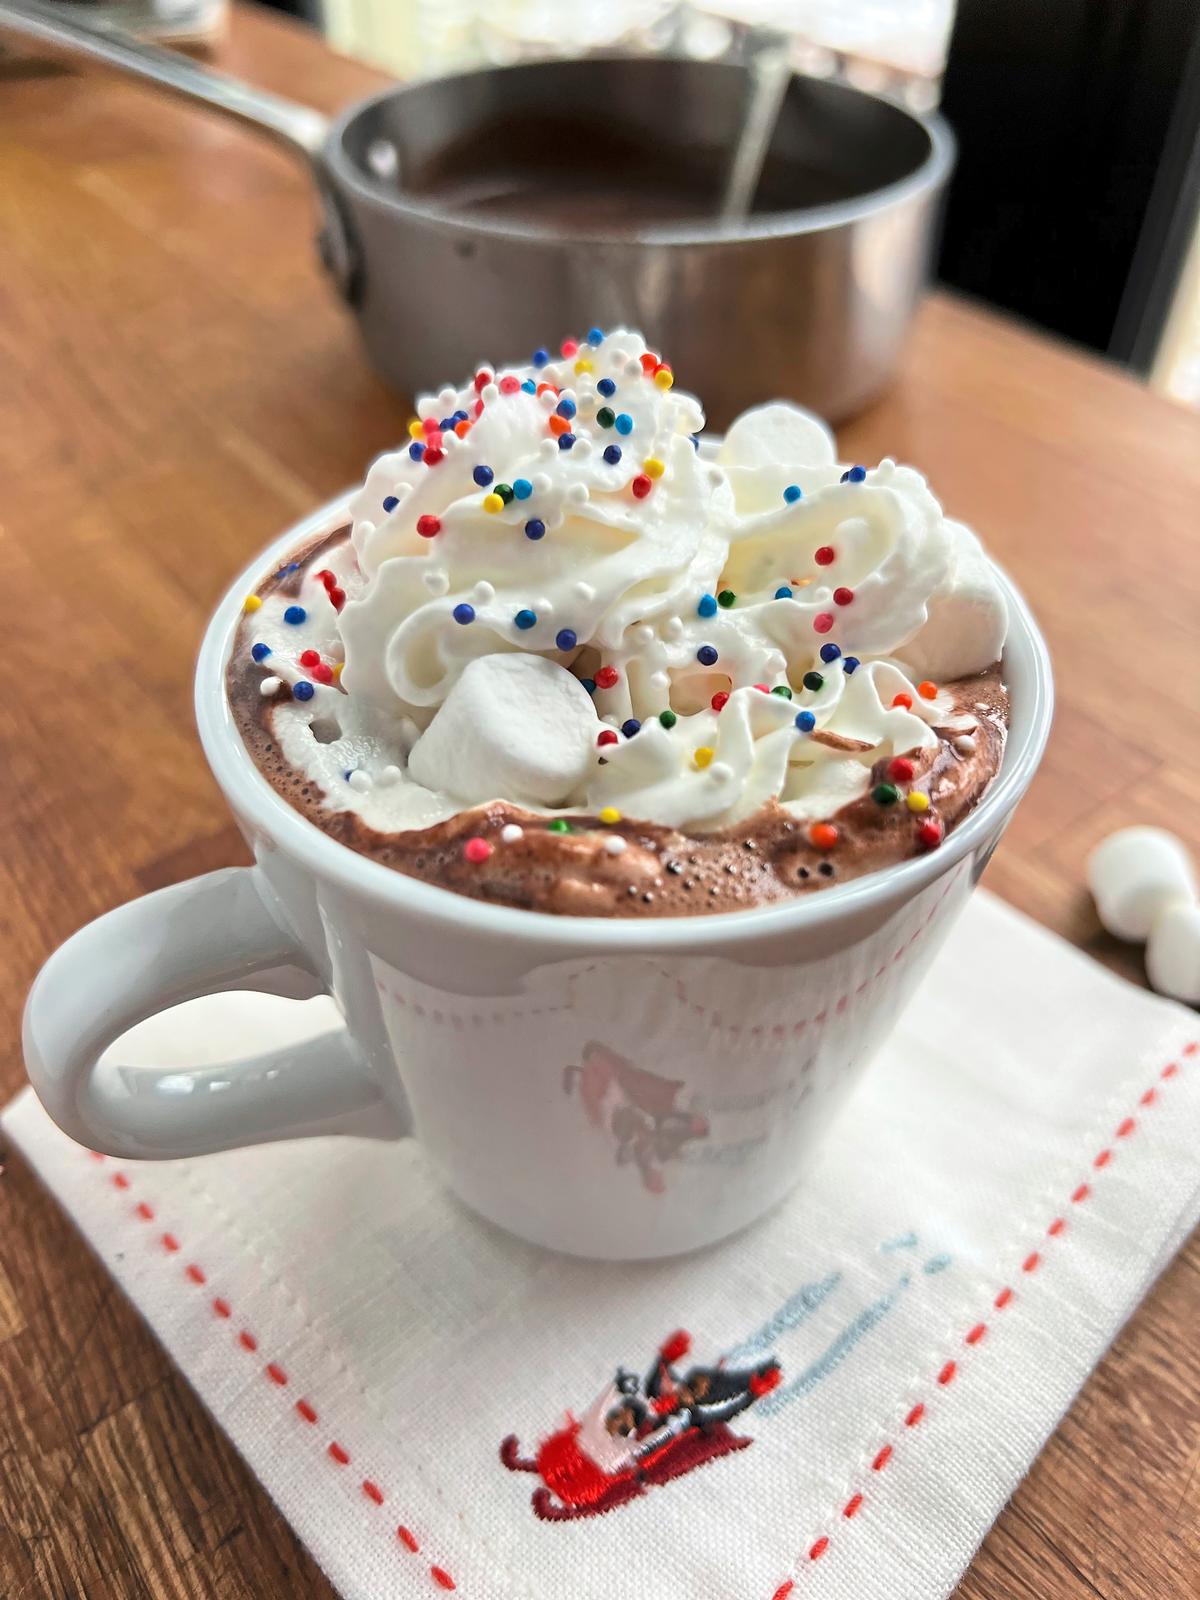 Hot cocoa topped with whipped cream and sprinkles is a favorite kids' winter warm-me-up. (Gretchen McKay/Pittsburgh Post-Gazette/TNS)